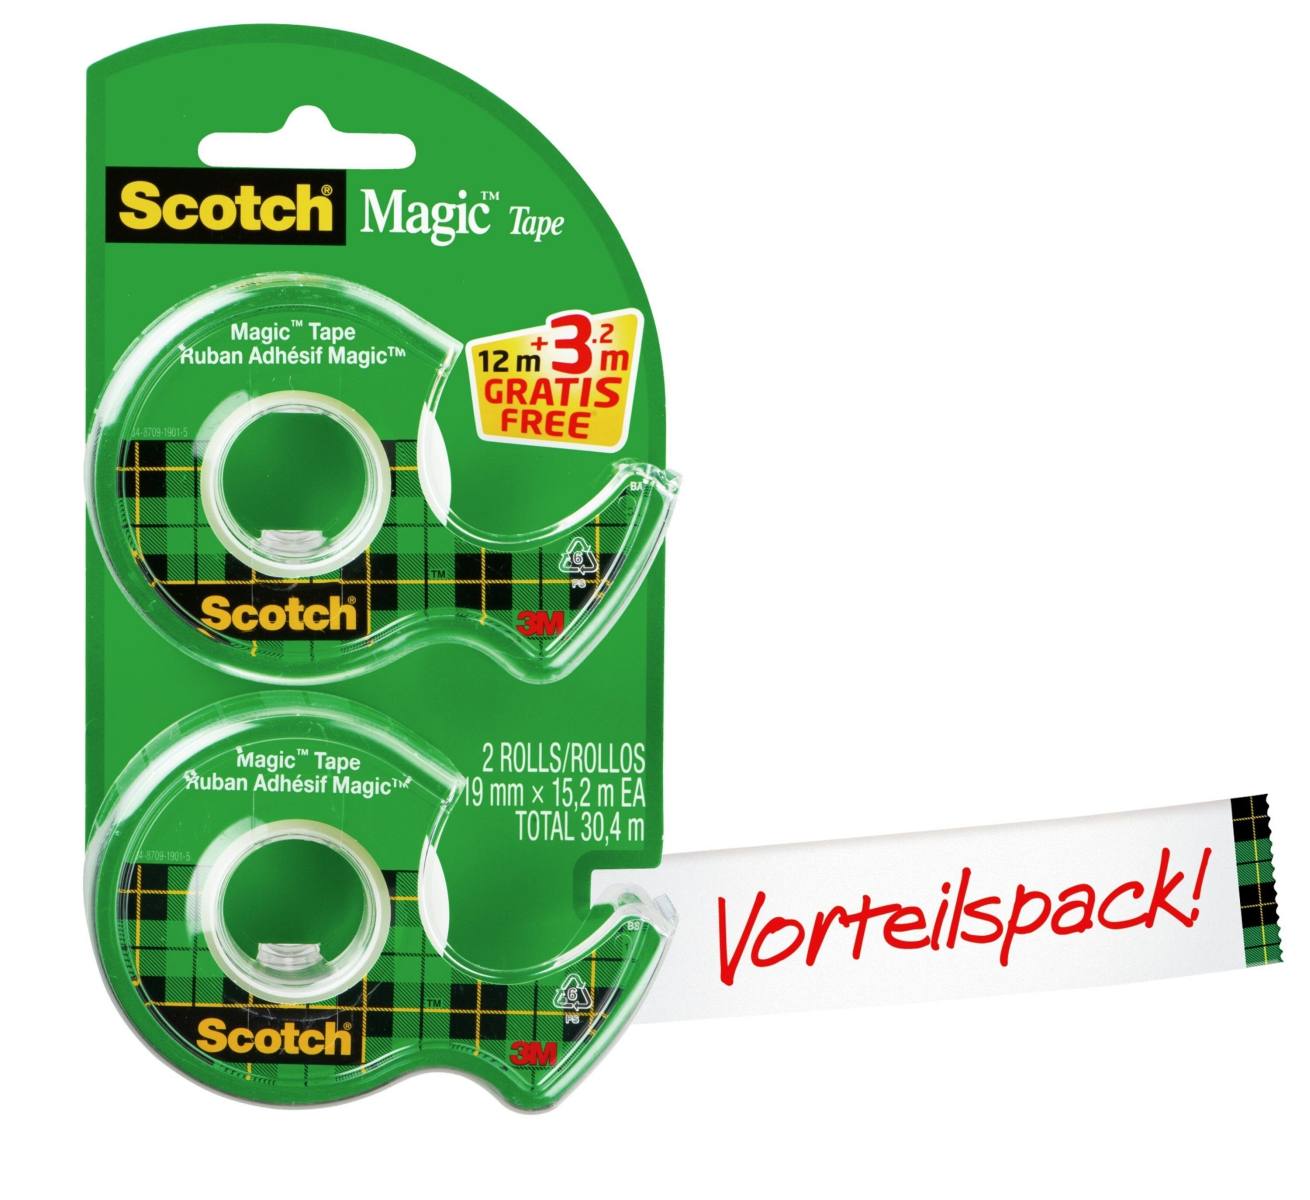 3M Scotch Magic hand dispenser Promotion 8-1915DP, 2 disposable hand dispensers incl. 2 rolls of Scotch Magic adhesive tape at a special price, dimensions: 19 mm x 12 m +3.2 m free of charge